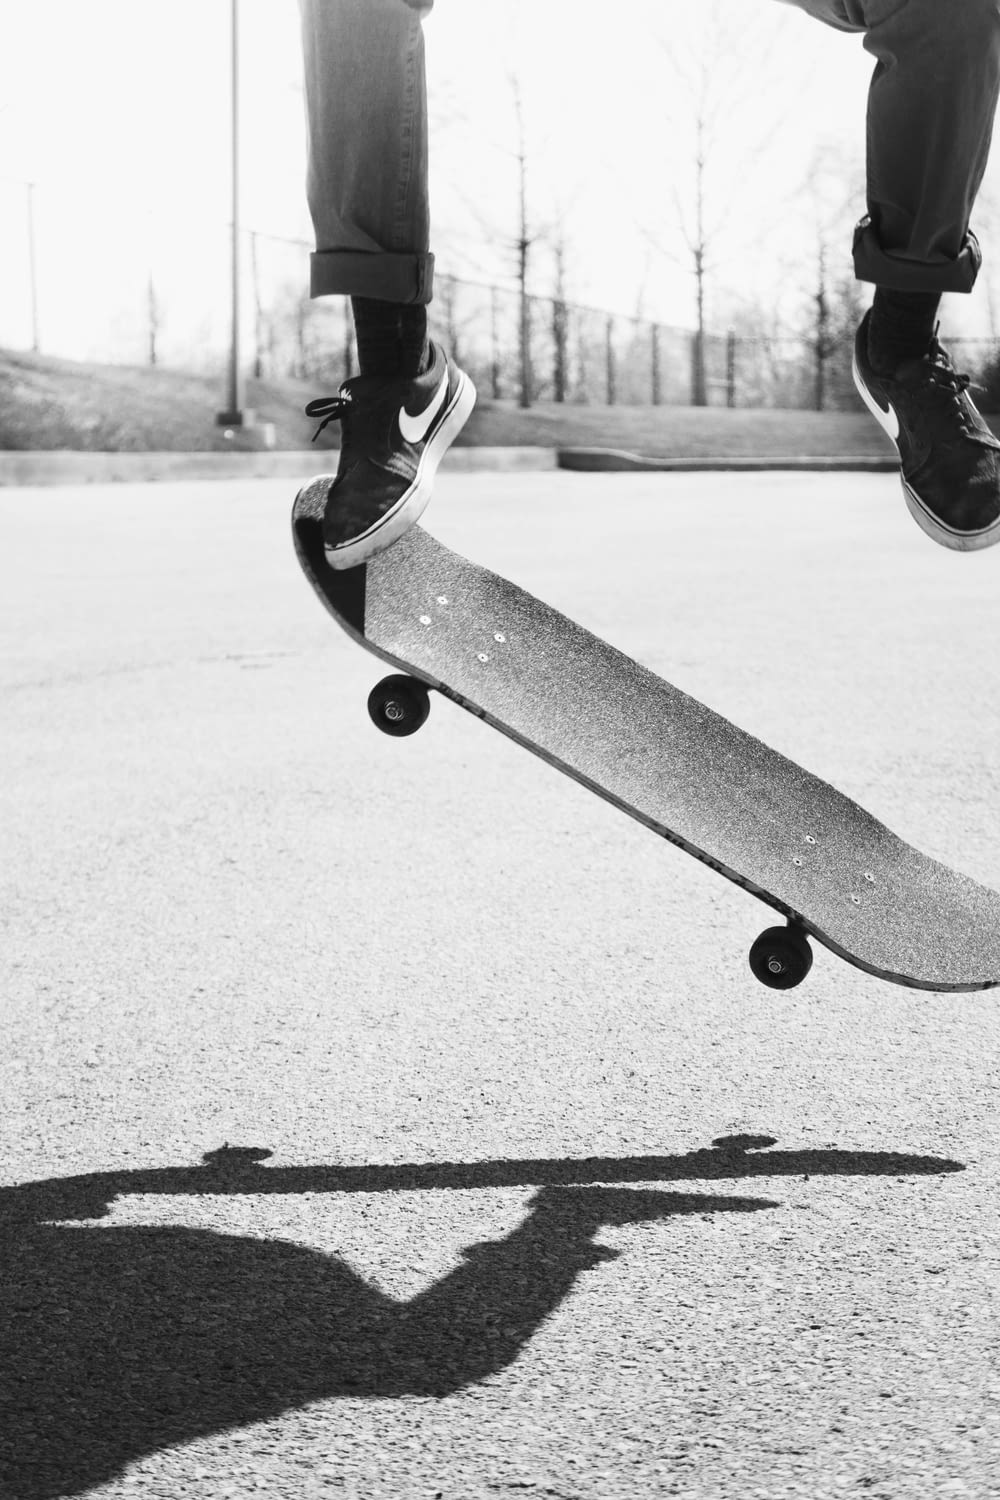 grayscale photo of person playing skatebaord